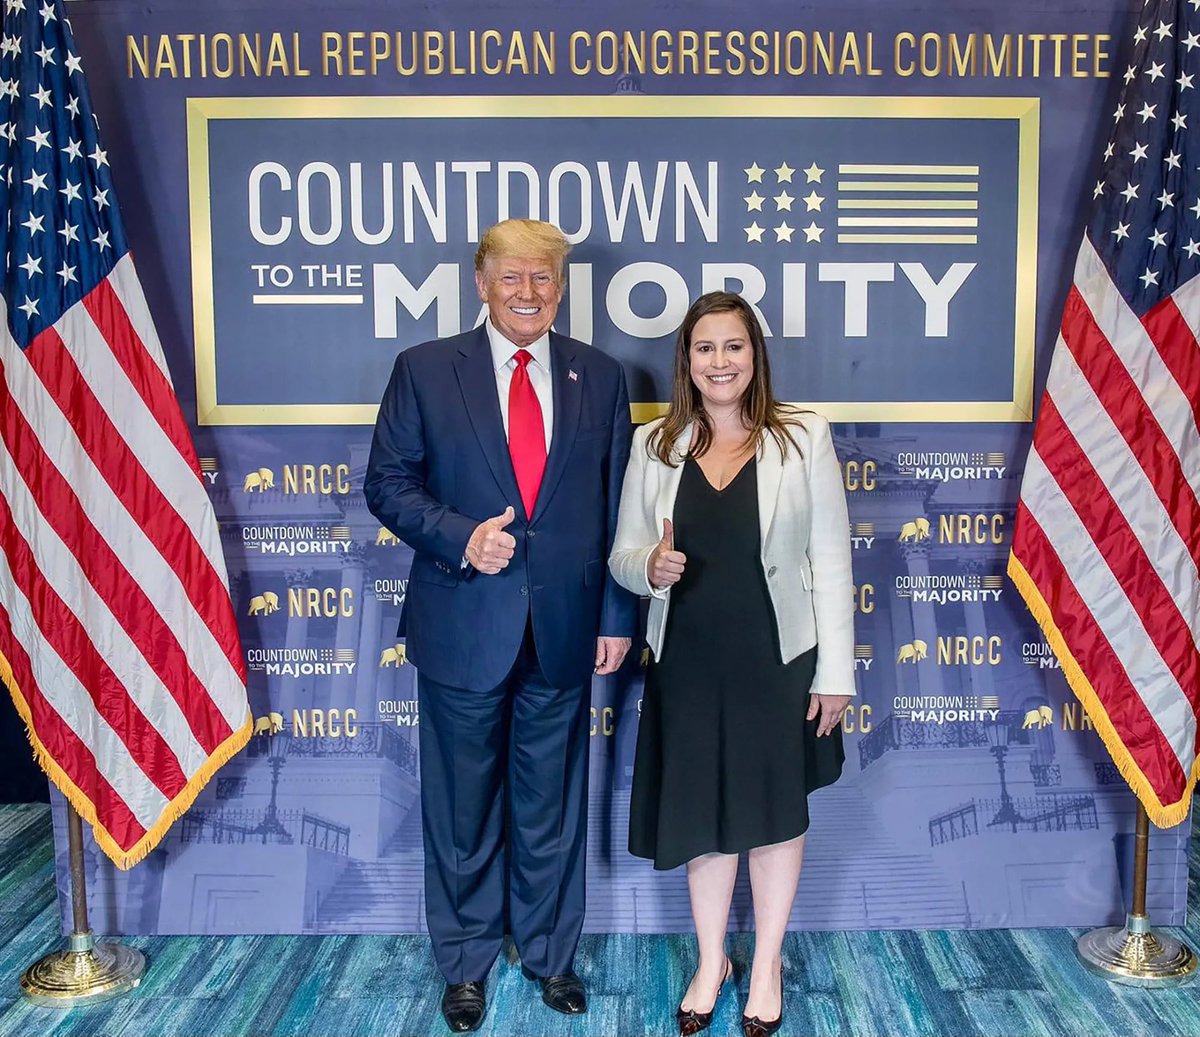 Elise Stefanik Just said at CPAC that Donald Trump left President Biden 'The strongest economy in my lifetime...The lowest unemployment in 50 years.'

This is a blatant lie. 
The unemployment rate was 6.3 percent in January 2021. It's 3.7 percent now. 
The GDP growth under Trump